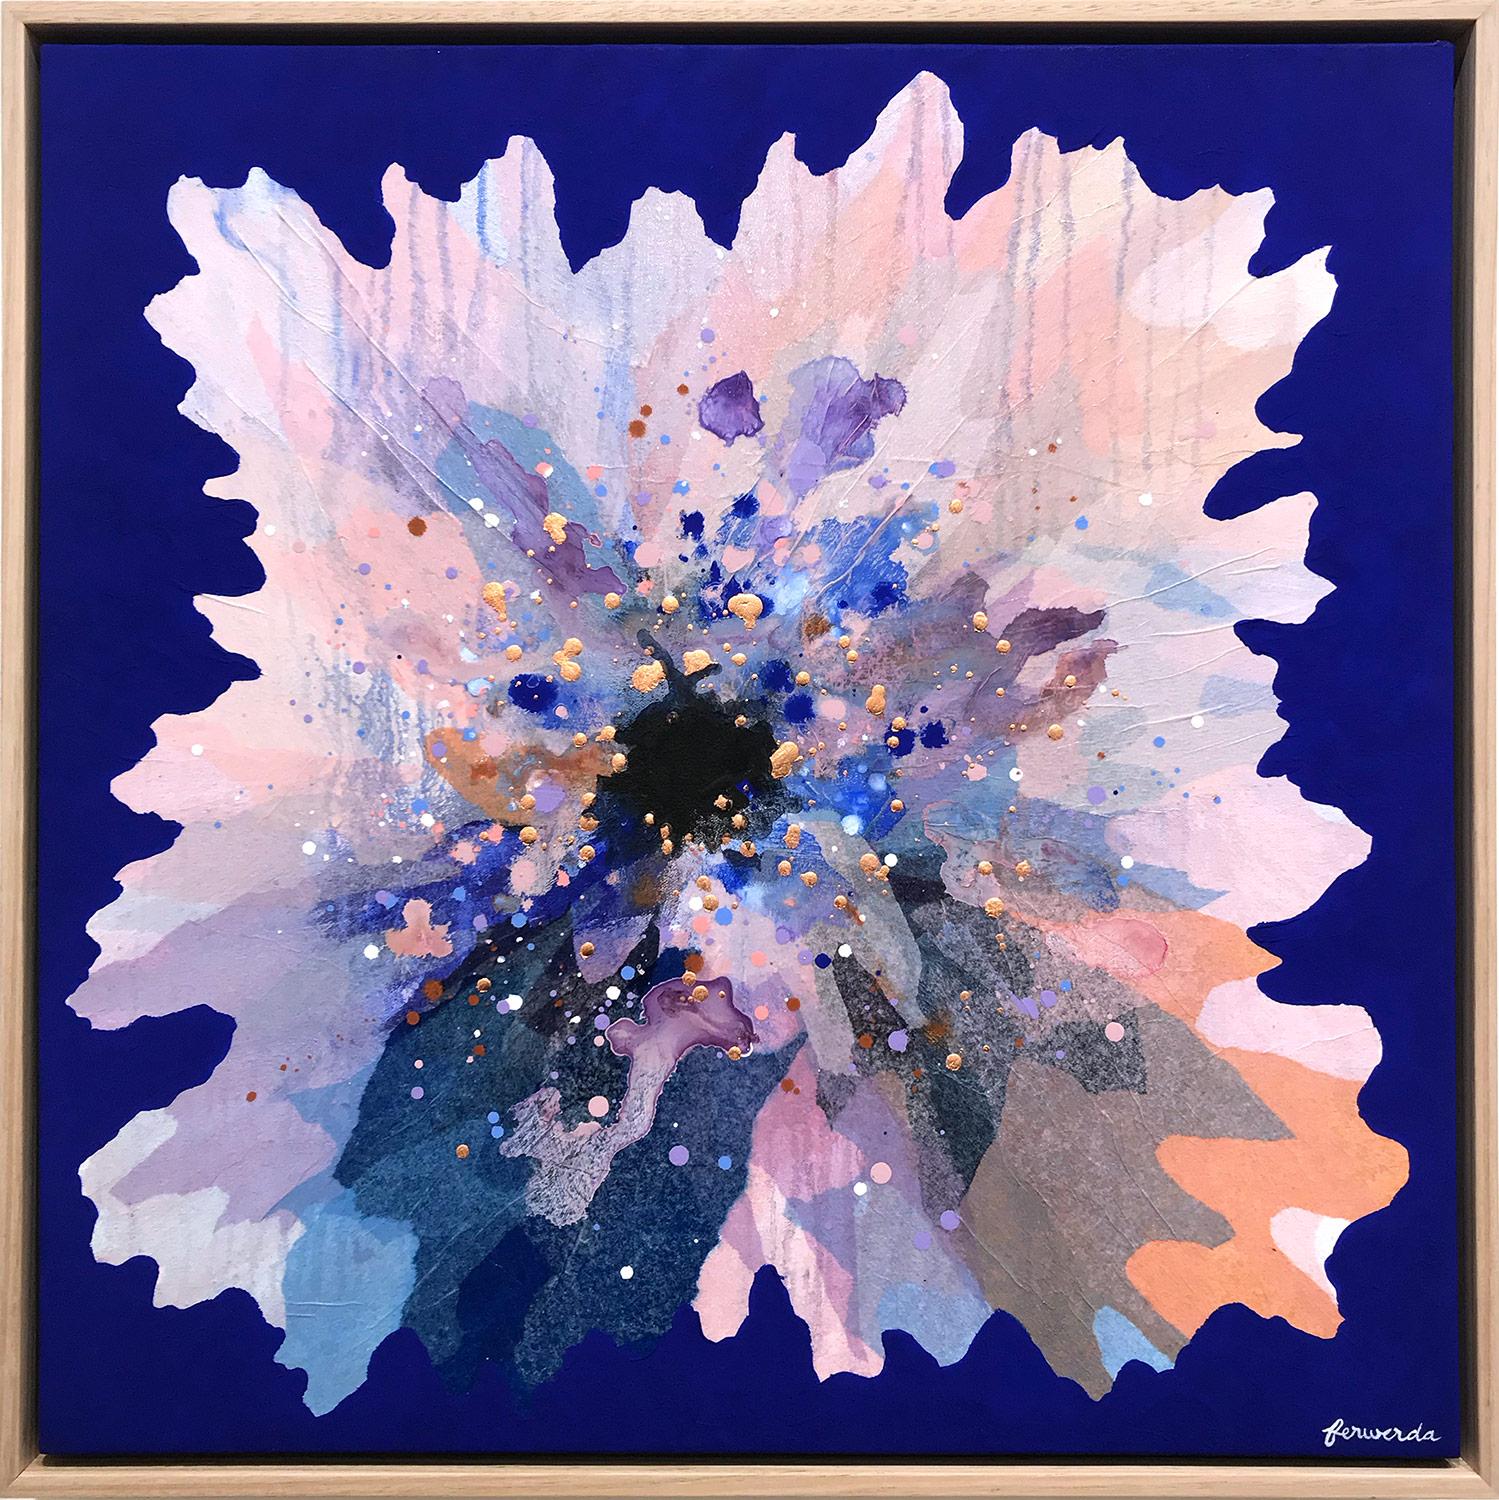 Antoinette Ferwerda Abstract Painting - "Cobalt Periwinkle" Contemporary Layered Mixed Media Floral Painting on Canvas